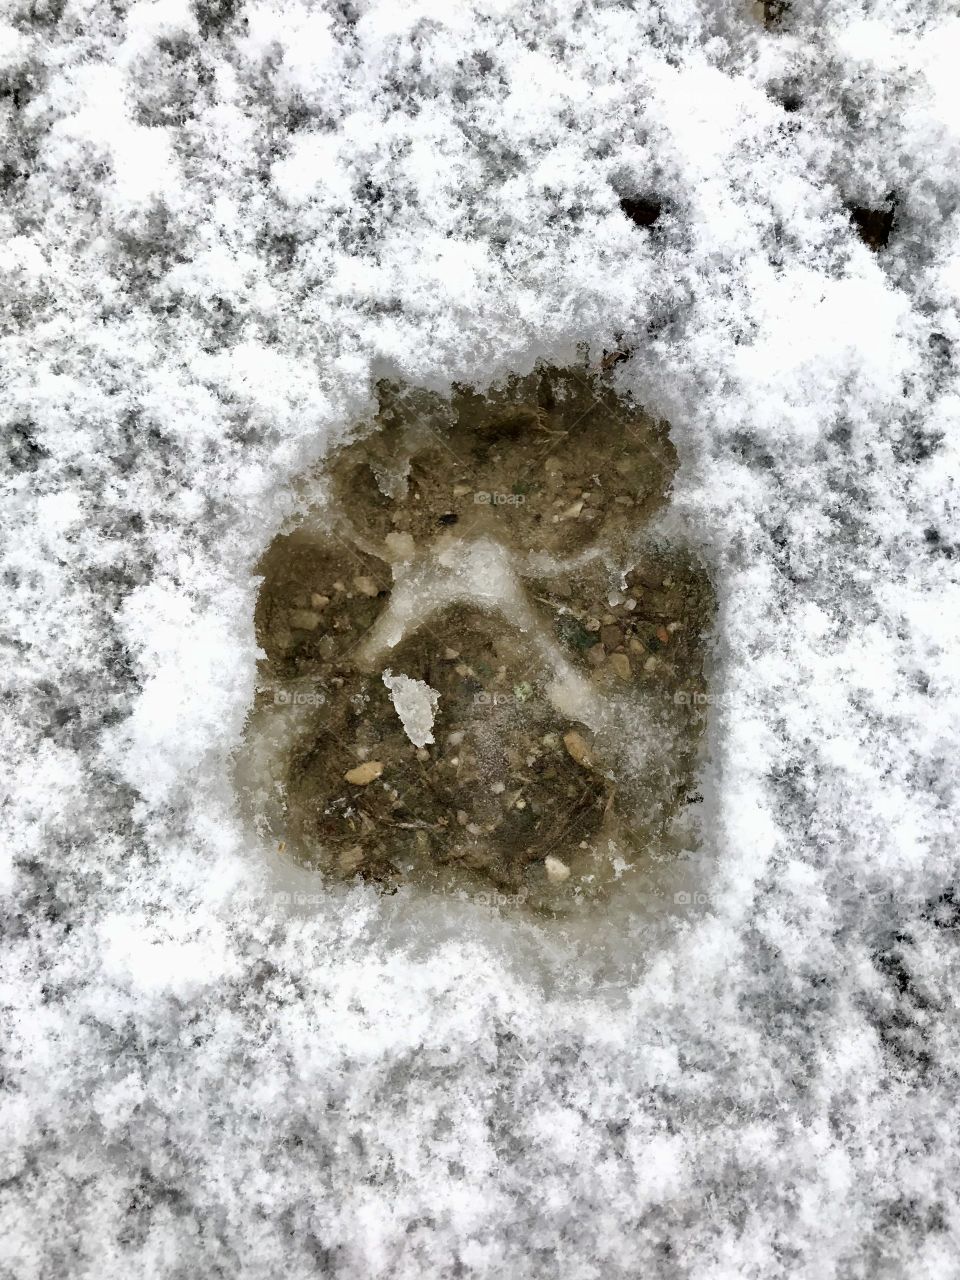 Puppy prints in the snow 